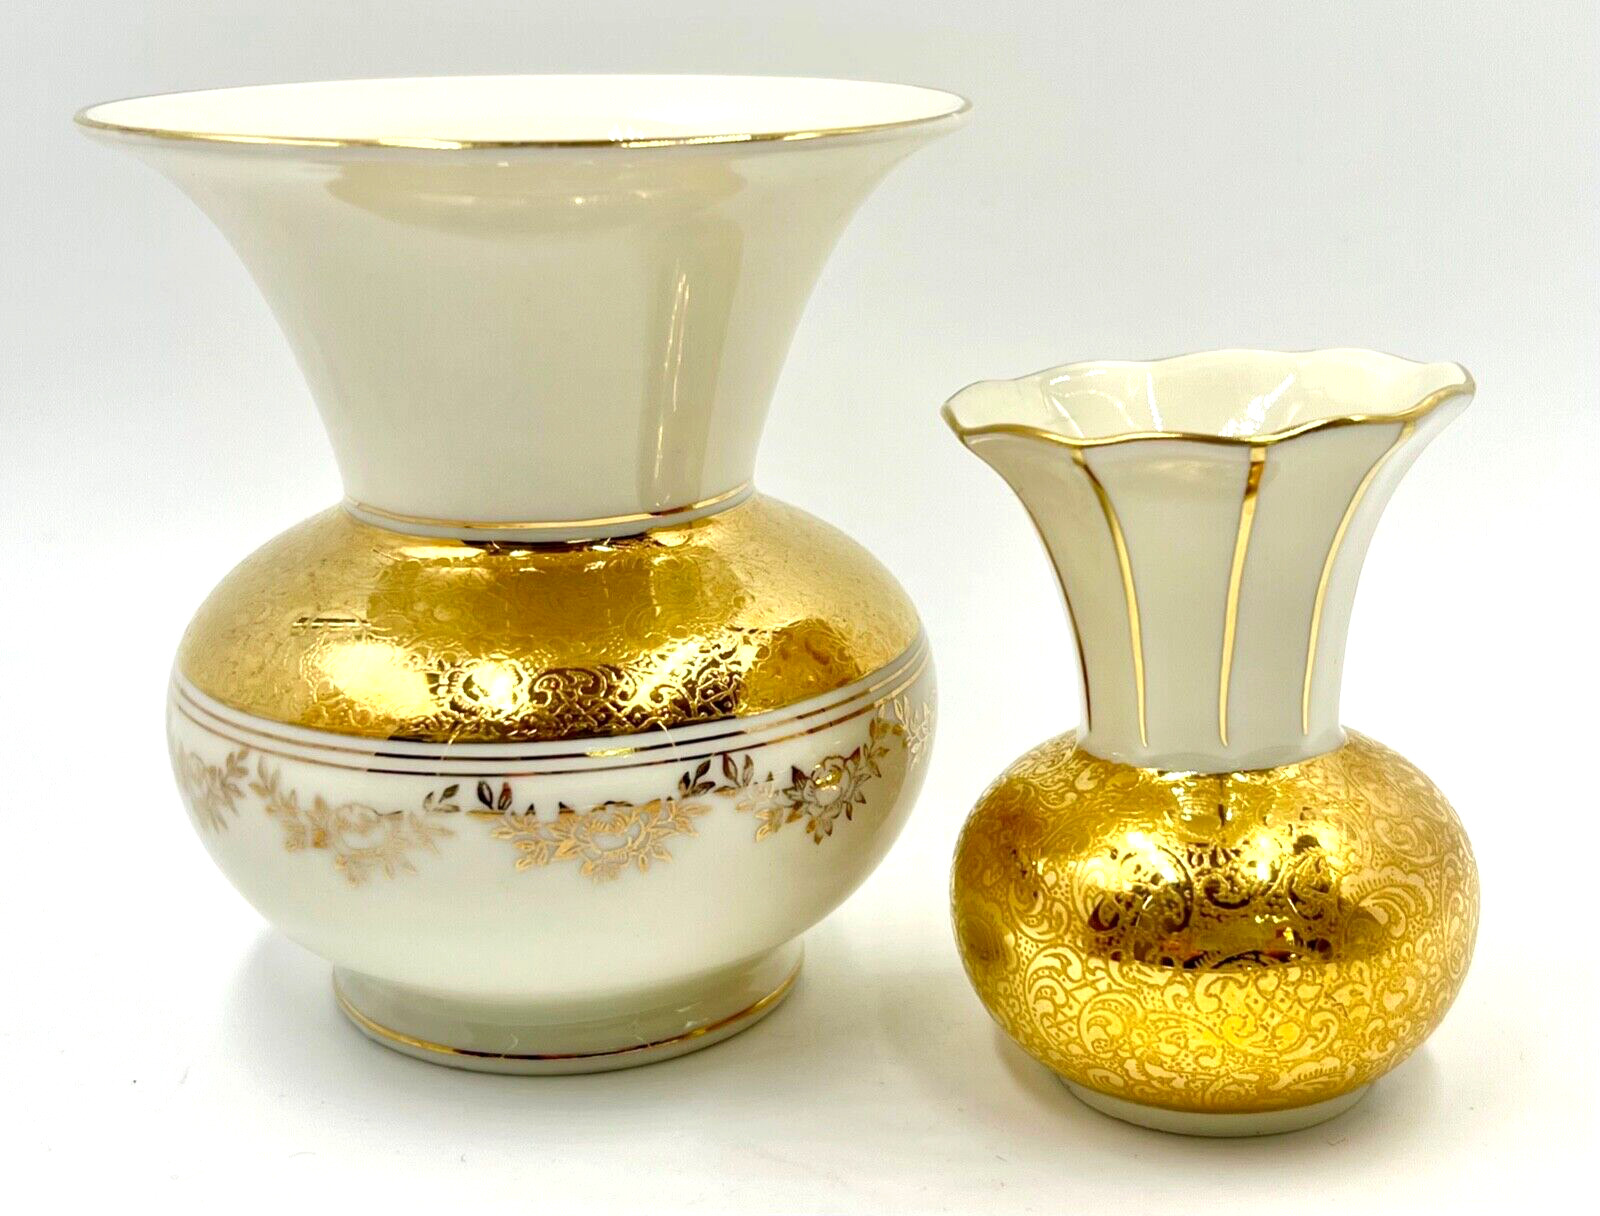 TWO LOVELY MARION SMALL GOLD ENCRUSTED VASES; ALKA GERMANY; EXCELLENT CONDITION